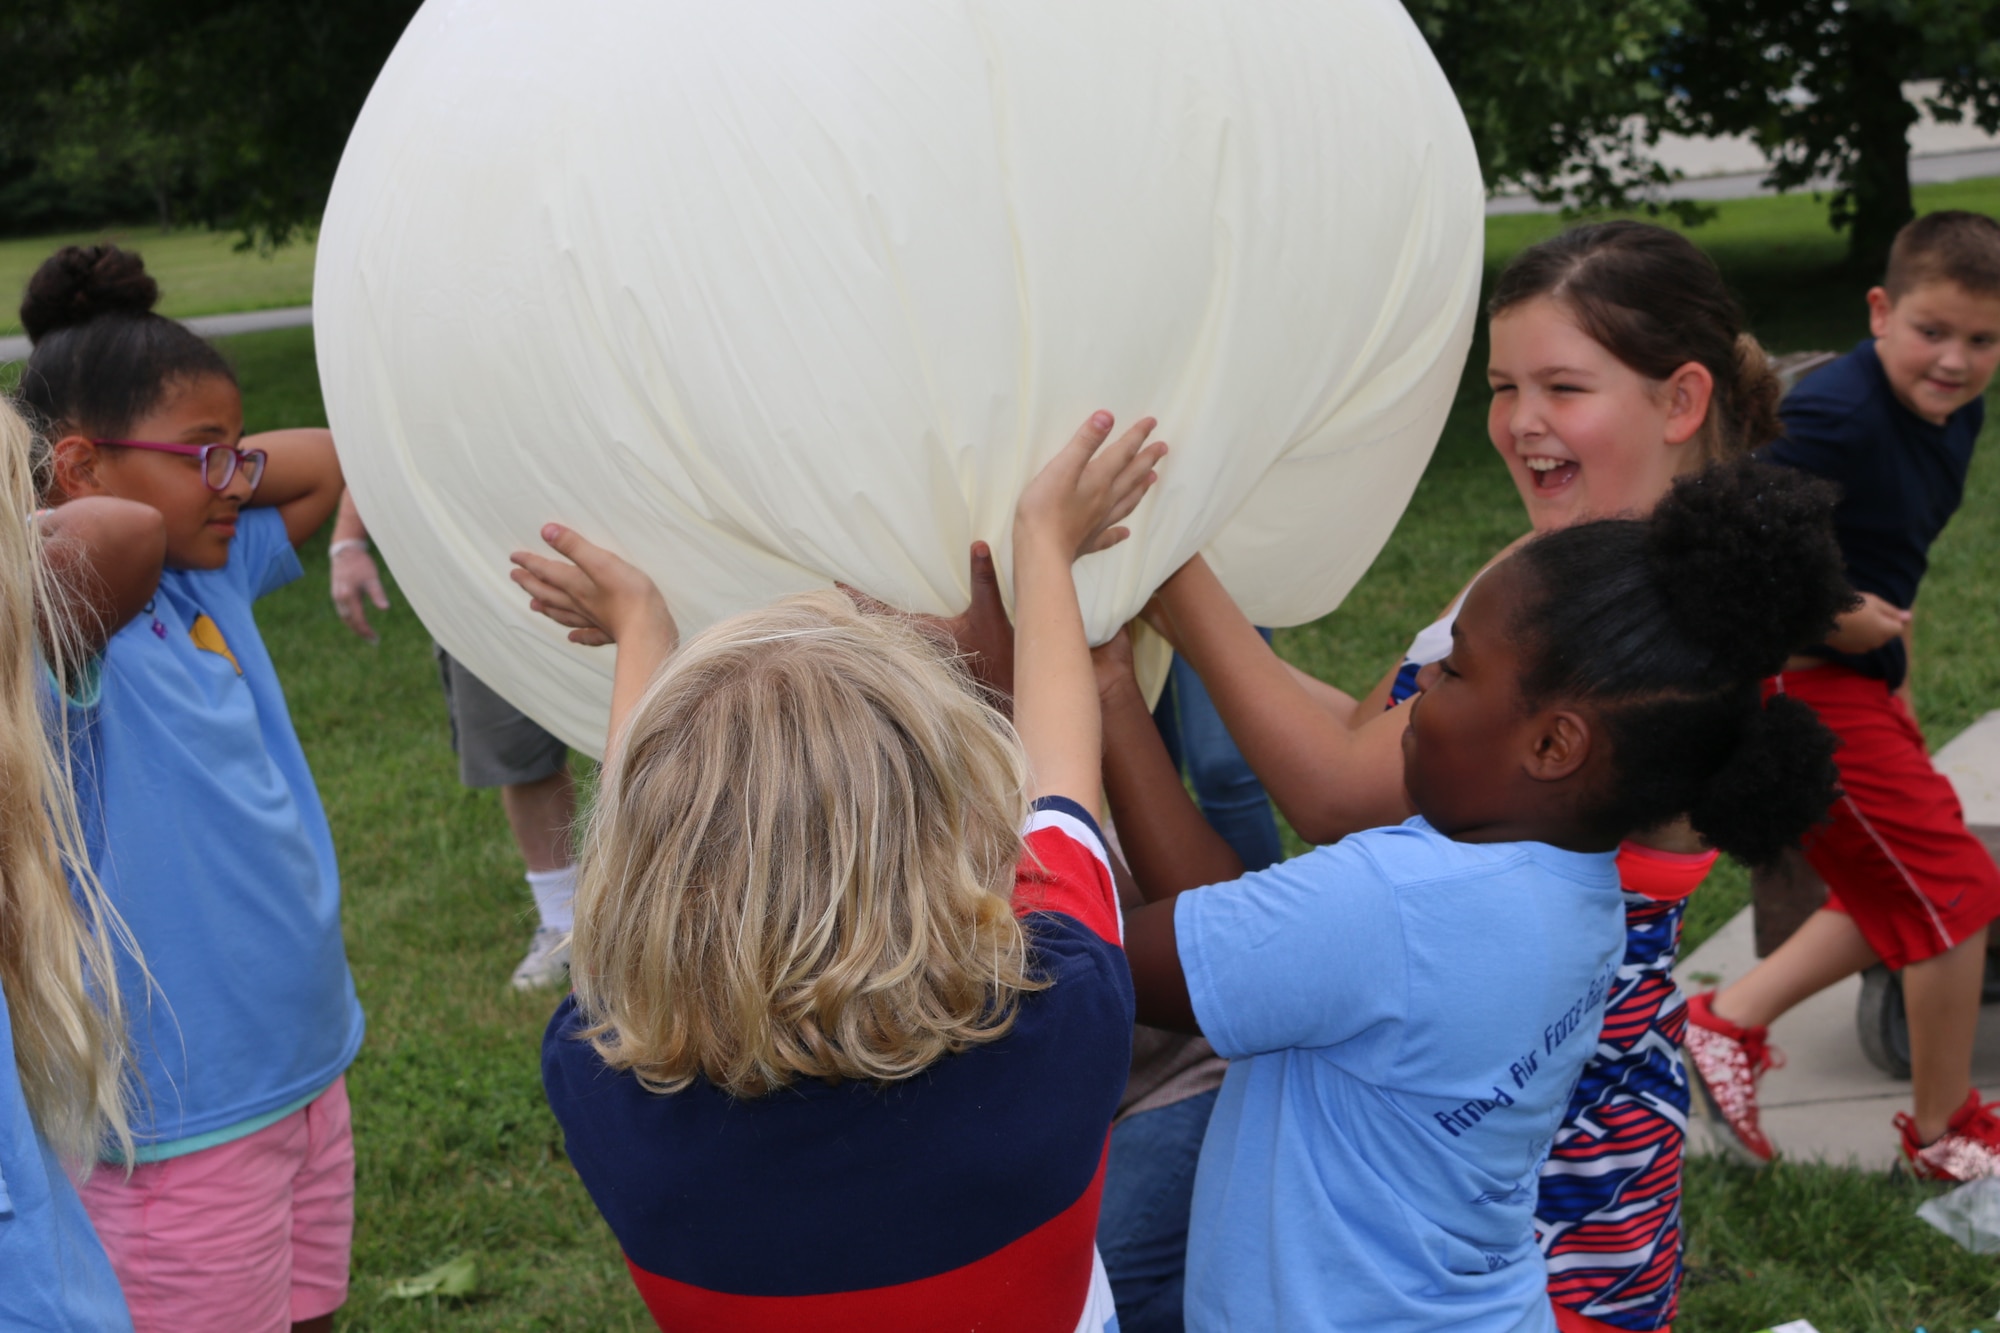 Participants in the Hands-On Science Center Air Force STEM Summer Camp offer a helping hand as a high-altitude balloon is inflated. The balloon was launched on June 19 from the grounds of the HOSC as part of the Summer Camp program. (U.S. Air Force photo/Bradley Hicks)